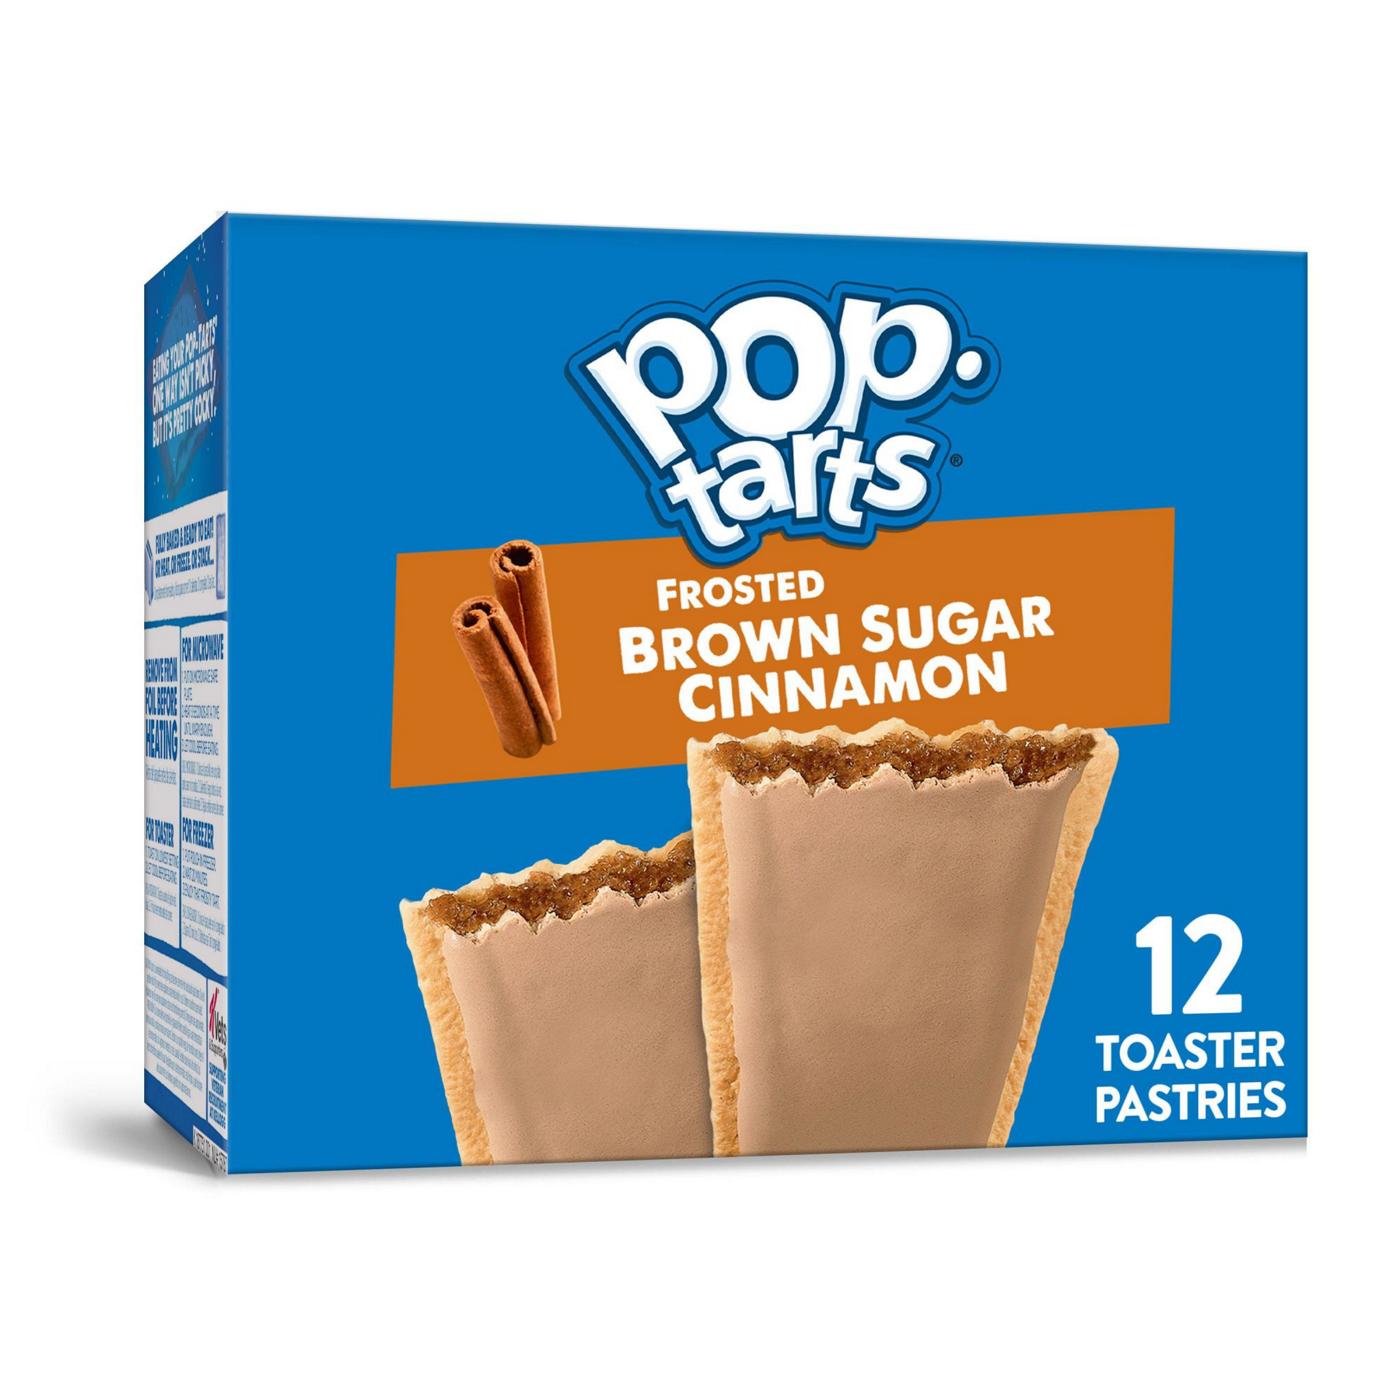 Pop-Tarts Frosted Brown Sugar Cinnamon Toaster Pastries; image 6 of 7